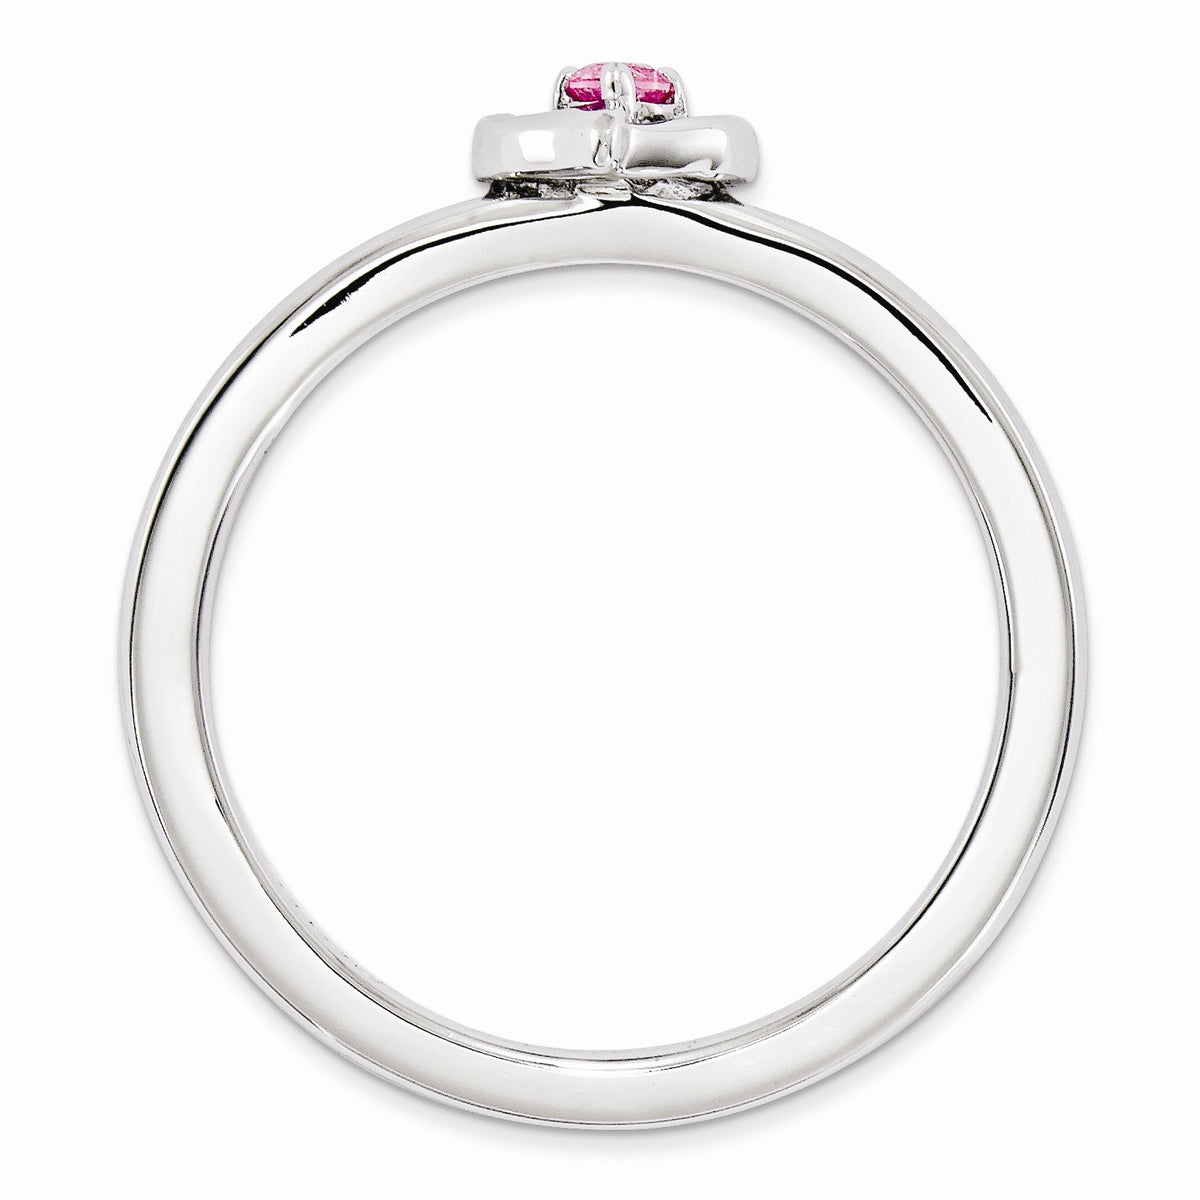 Alternate view of the Sterling Silver Stackable Created Pink Sapphire 6mm Heart Ring by The Black Bow Jewelry Co.